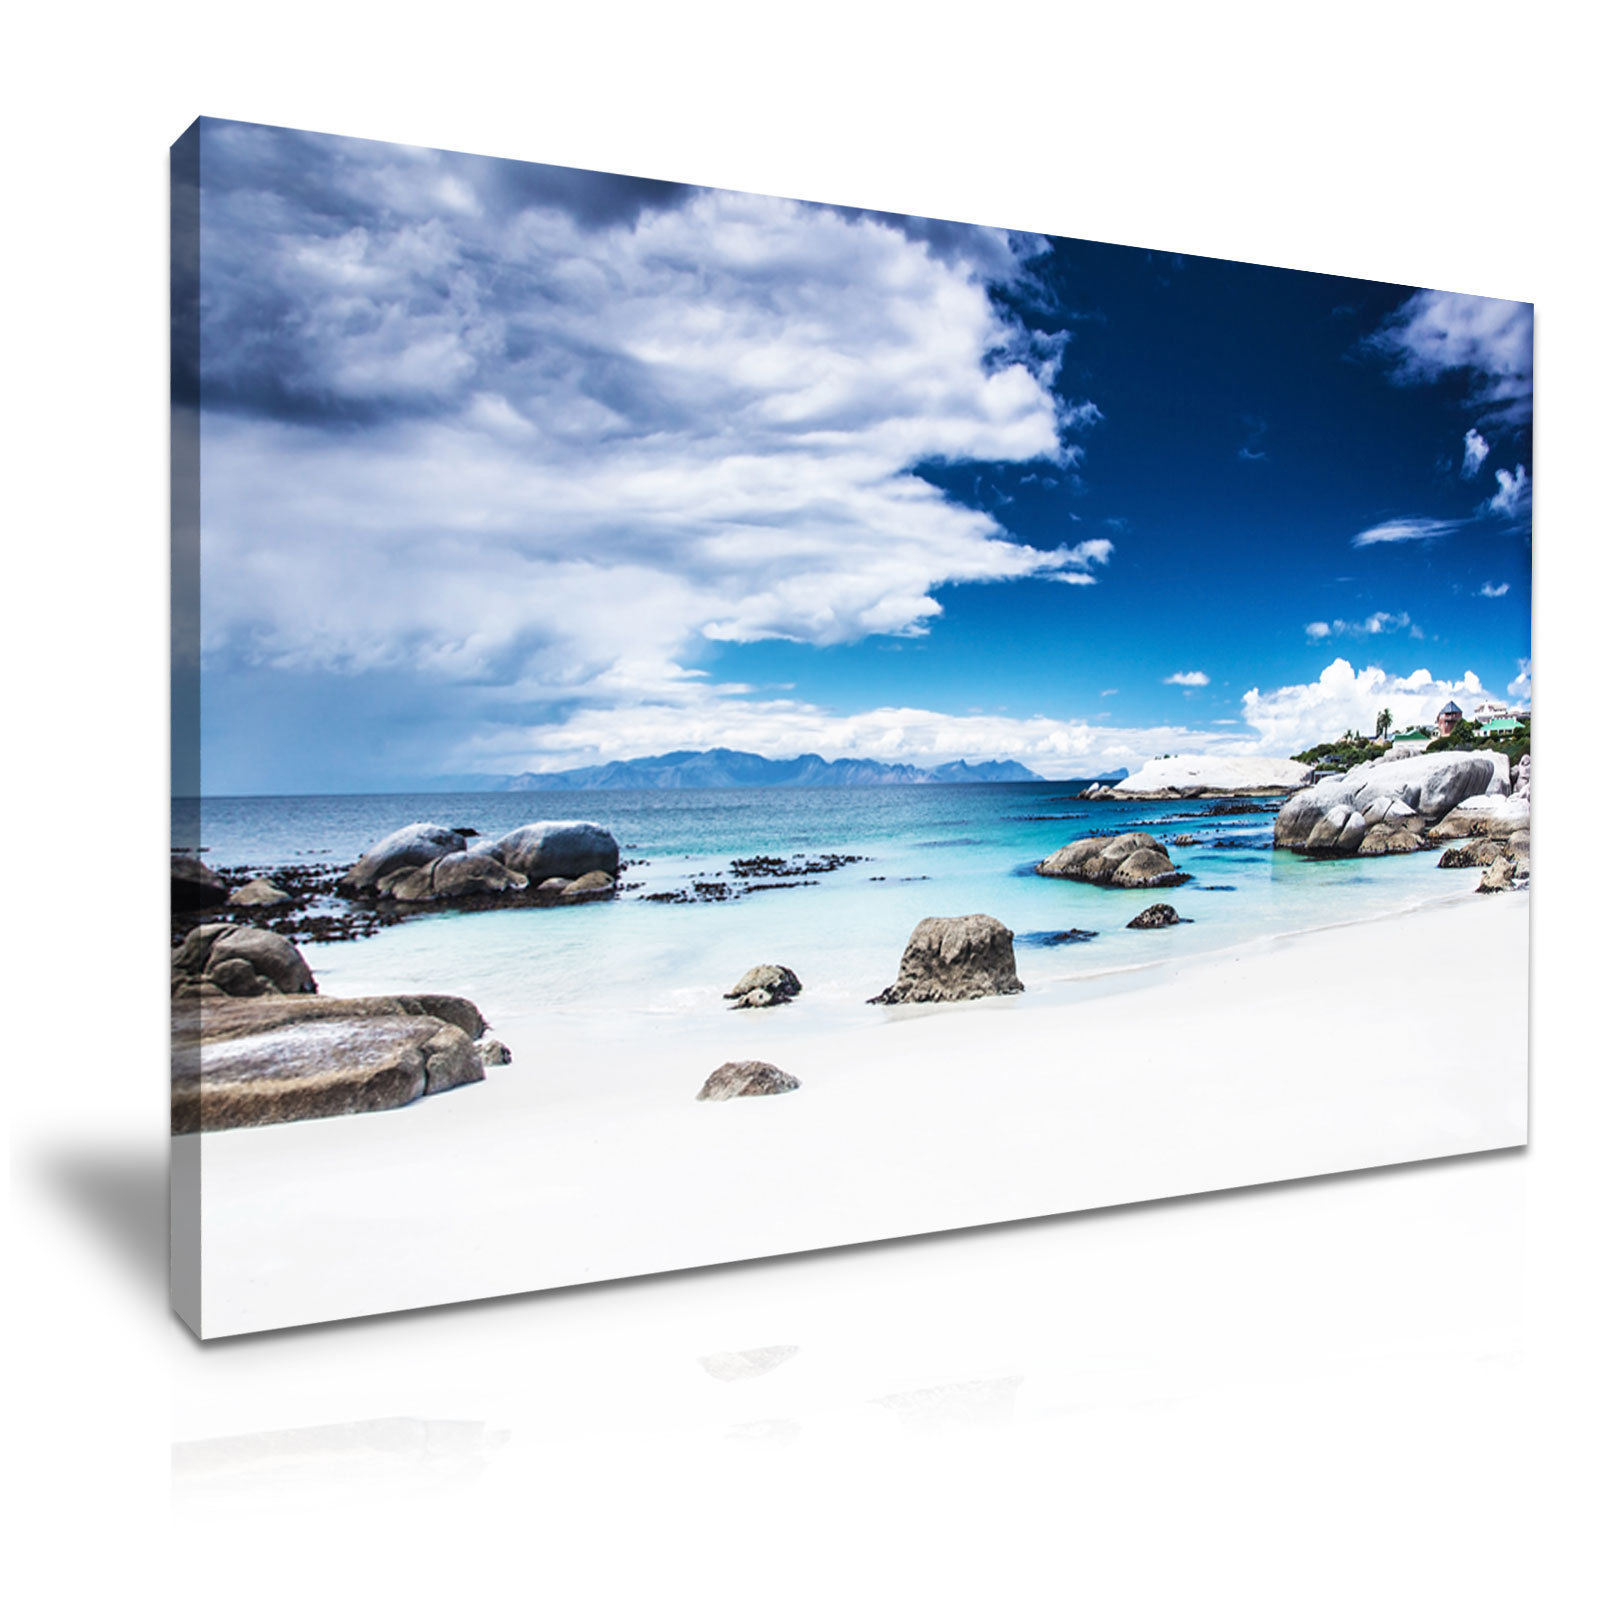 Seabeach Landscape Reproduction Canvas Painting with Low Price